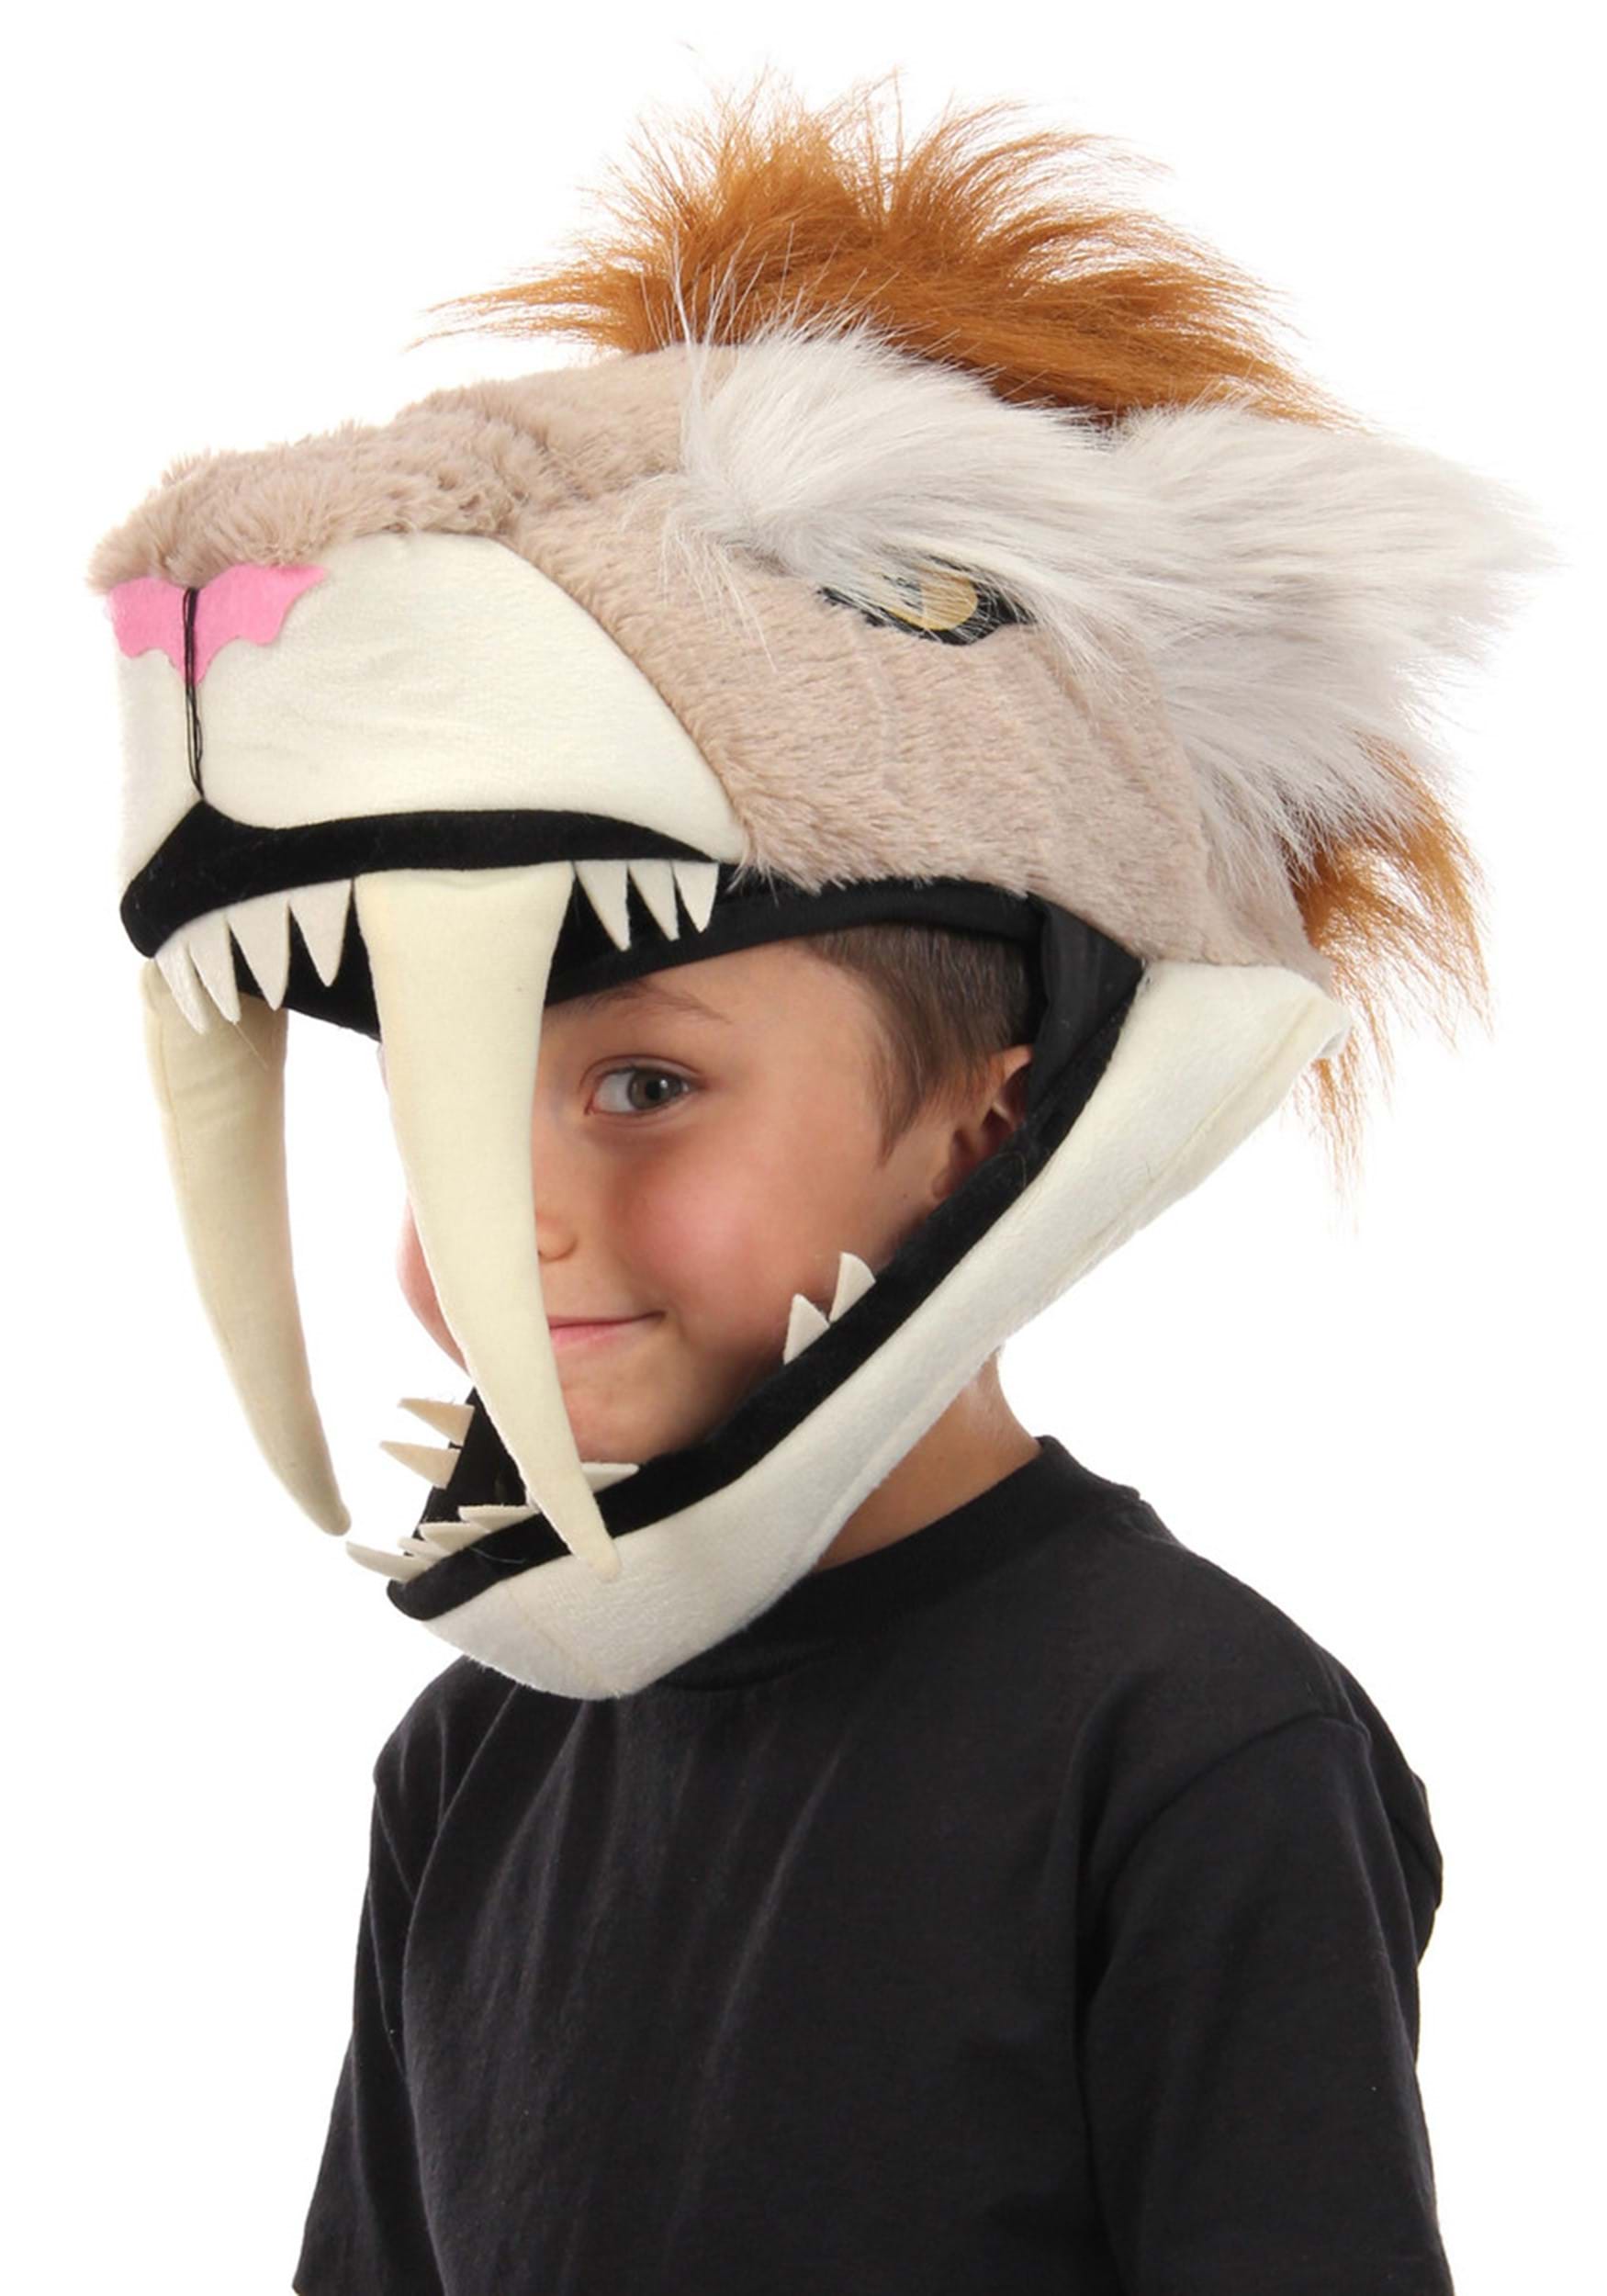 Jawesome Costume Hat Sabertooth